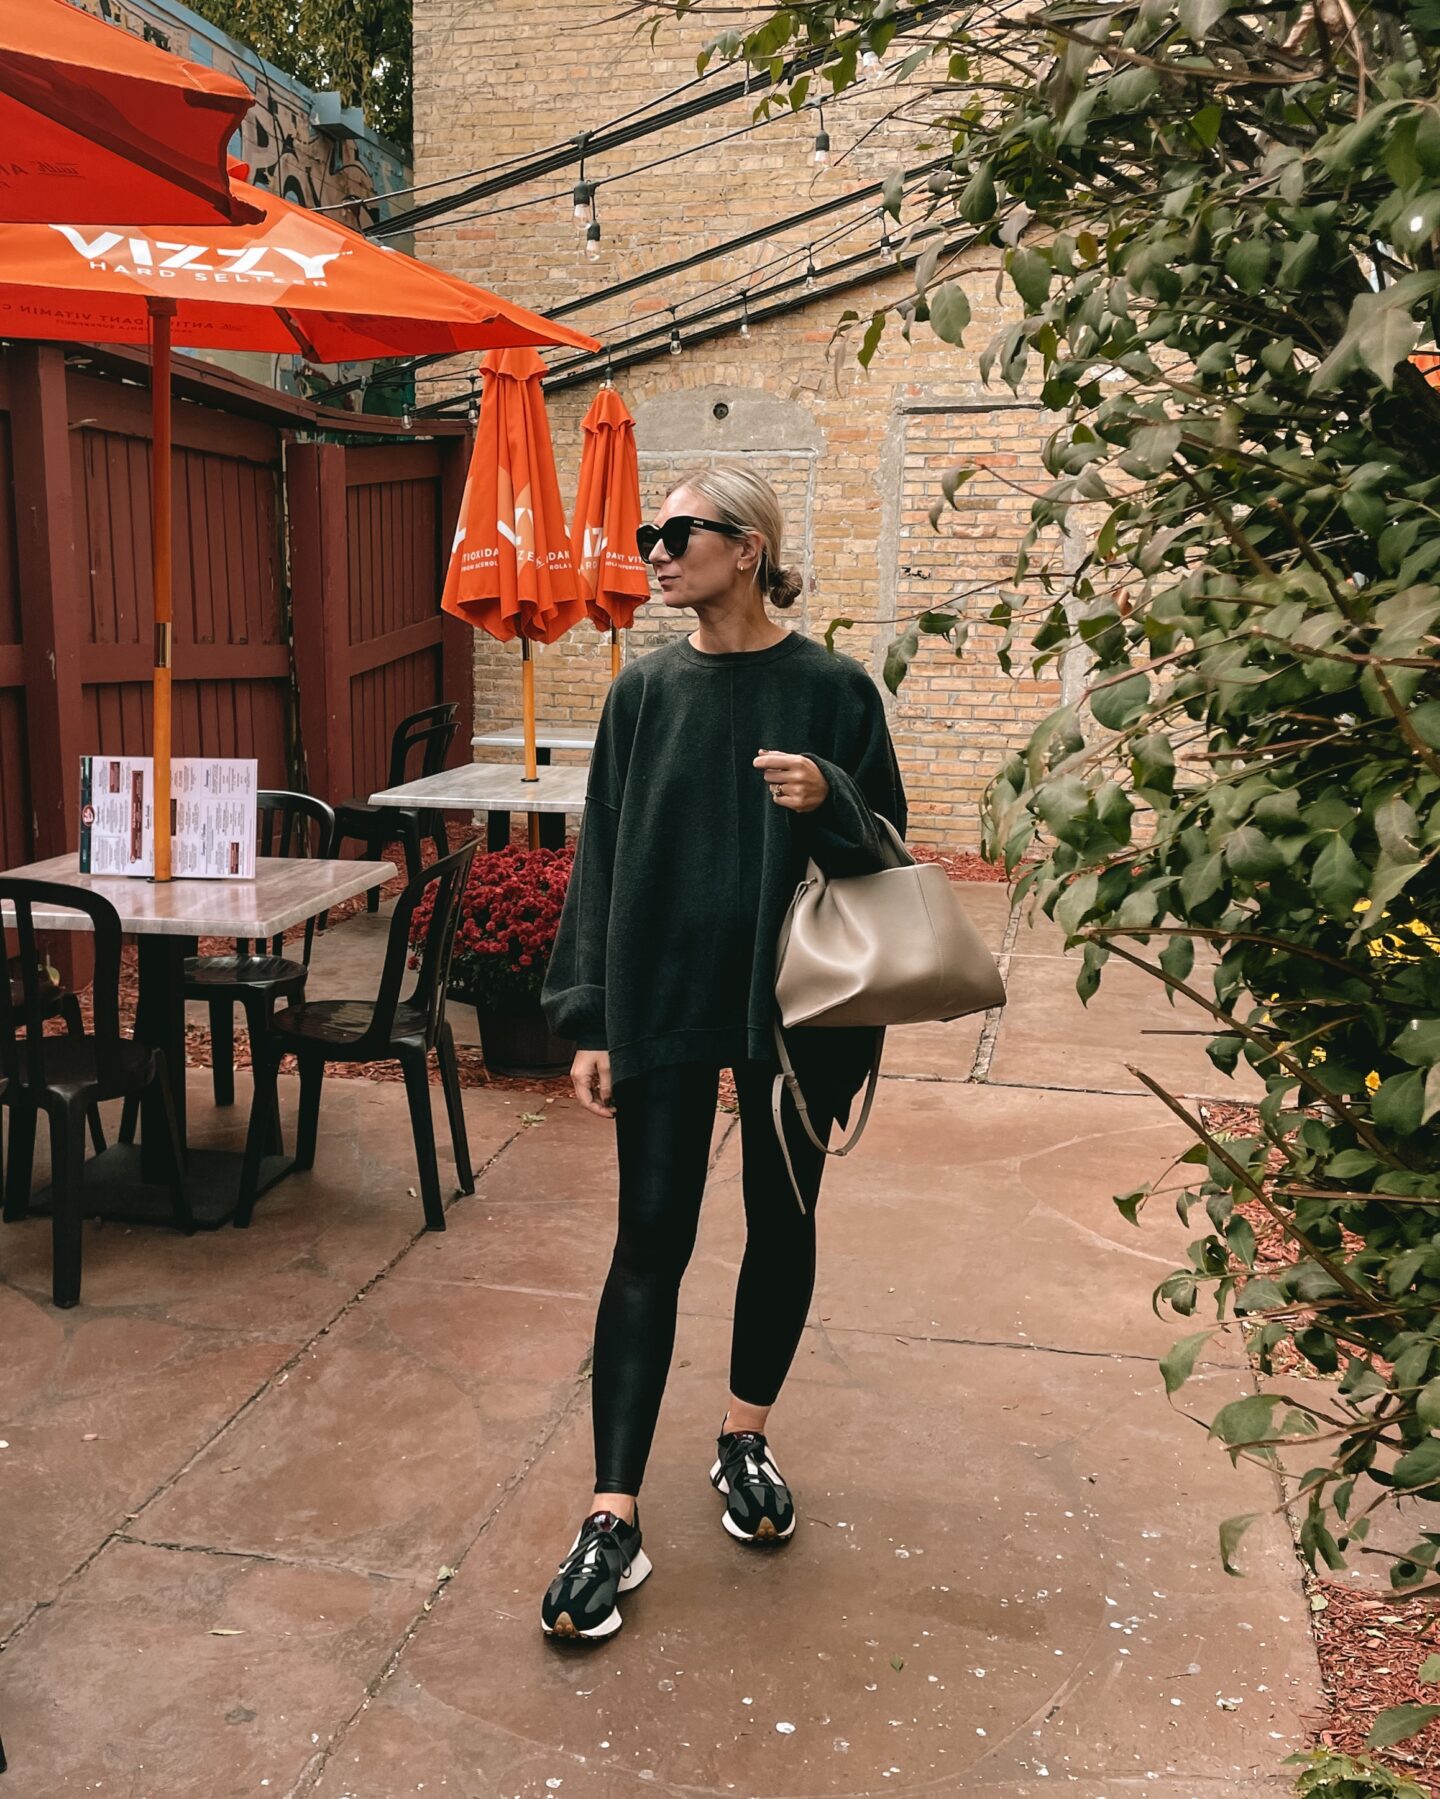 Karin Emily wears an oversized sweatshirt from free people over spanx faux leather leggings, and black and white new balance sneakers with a polene bag and black le specs air heart sunglasses